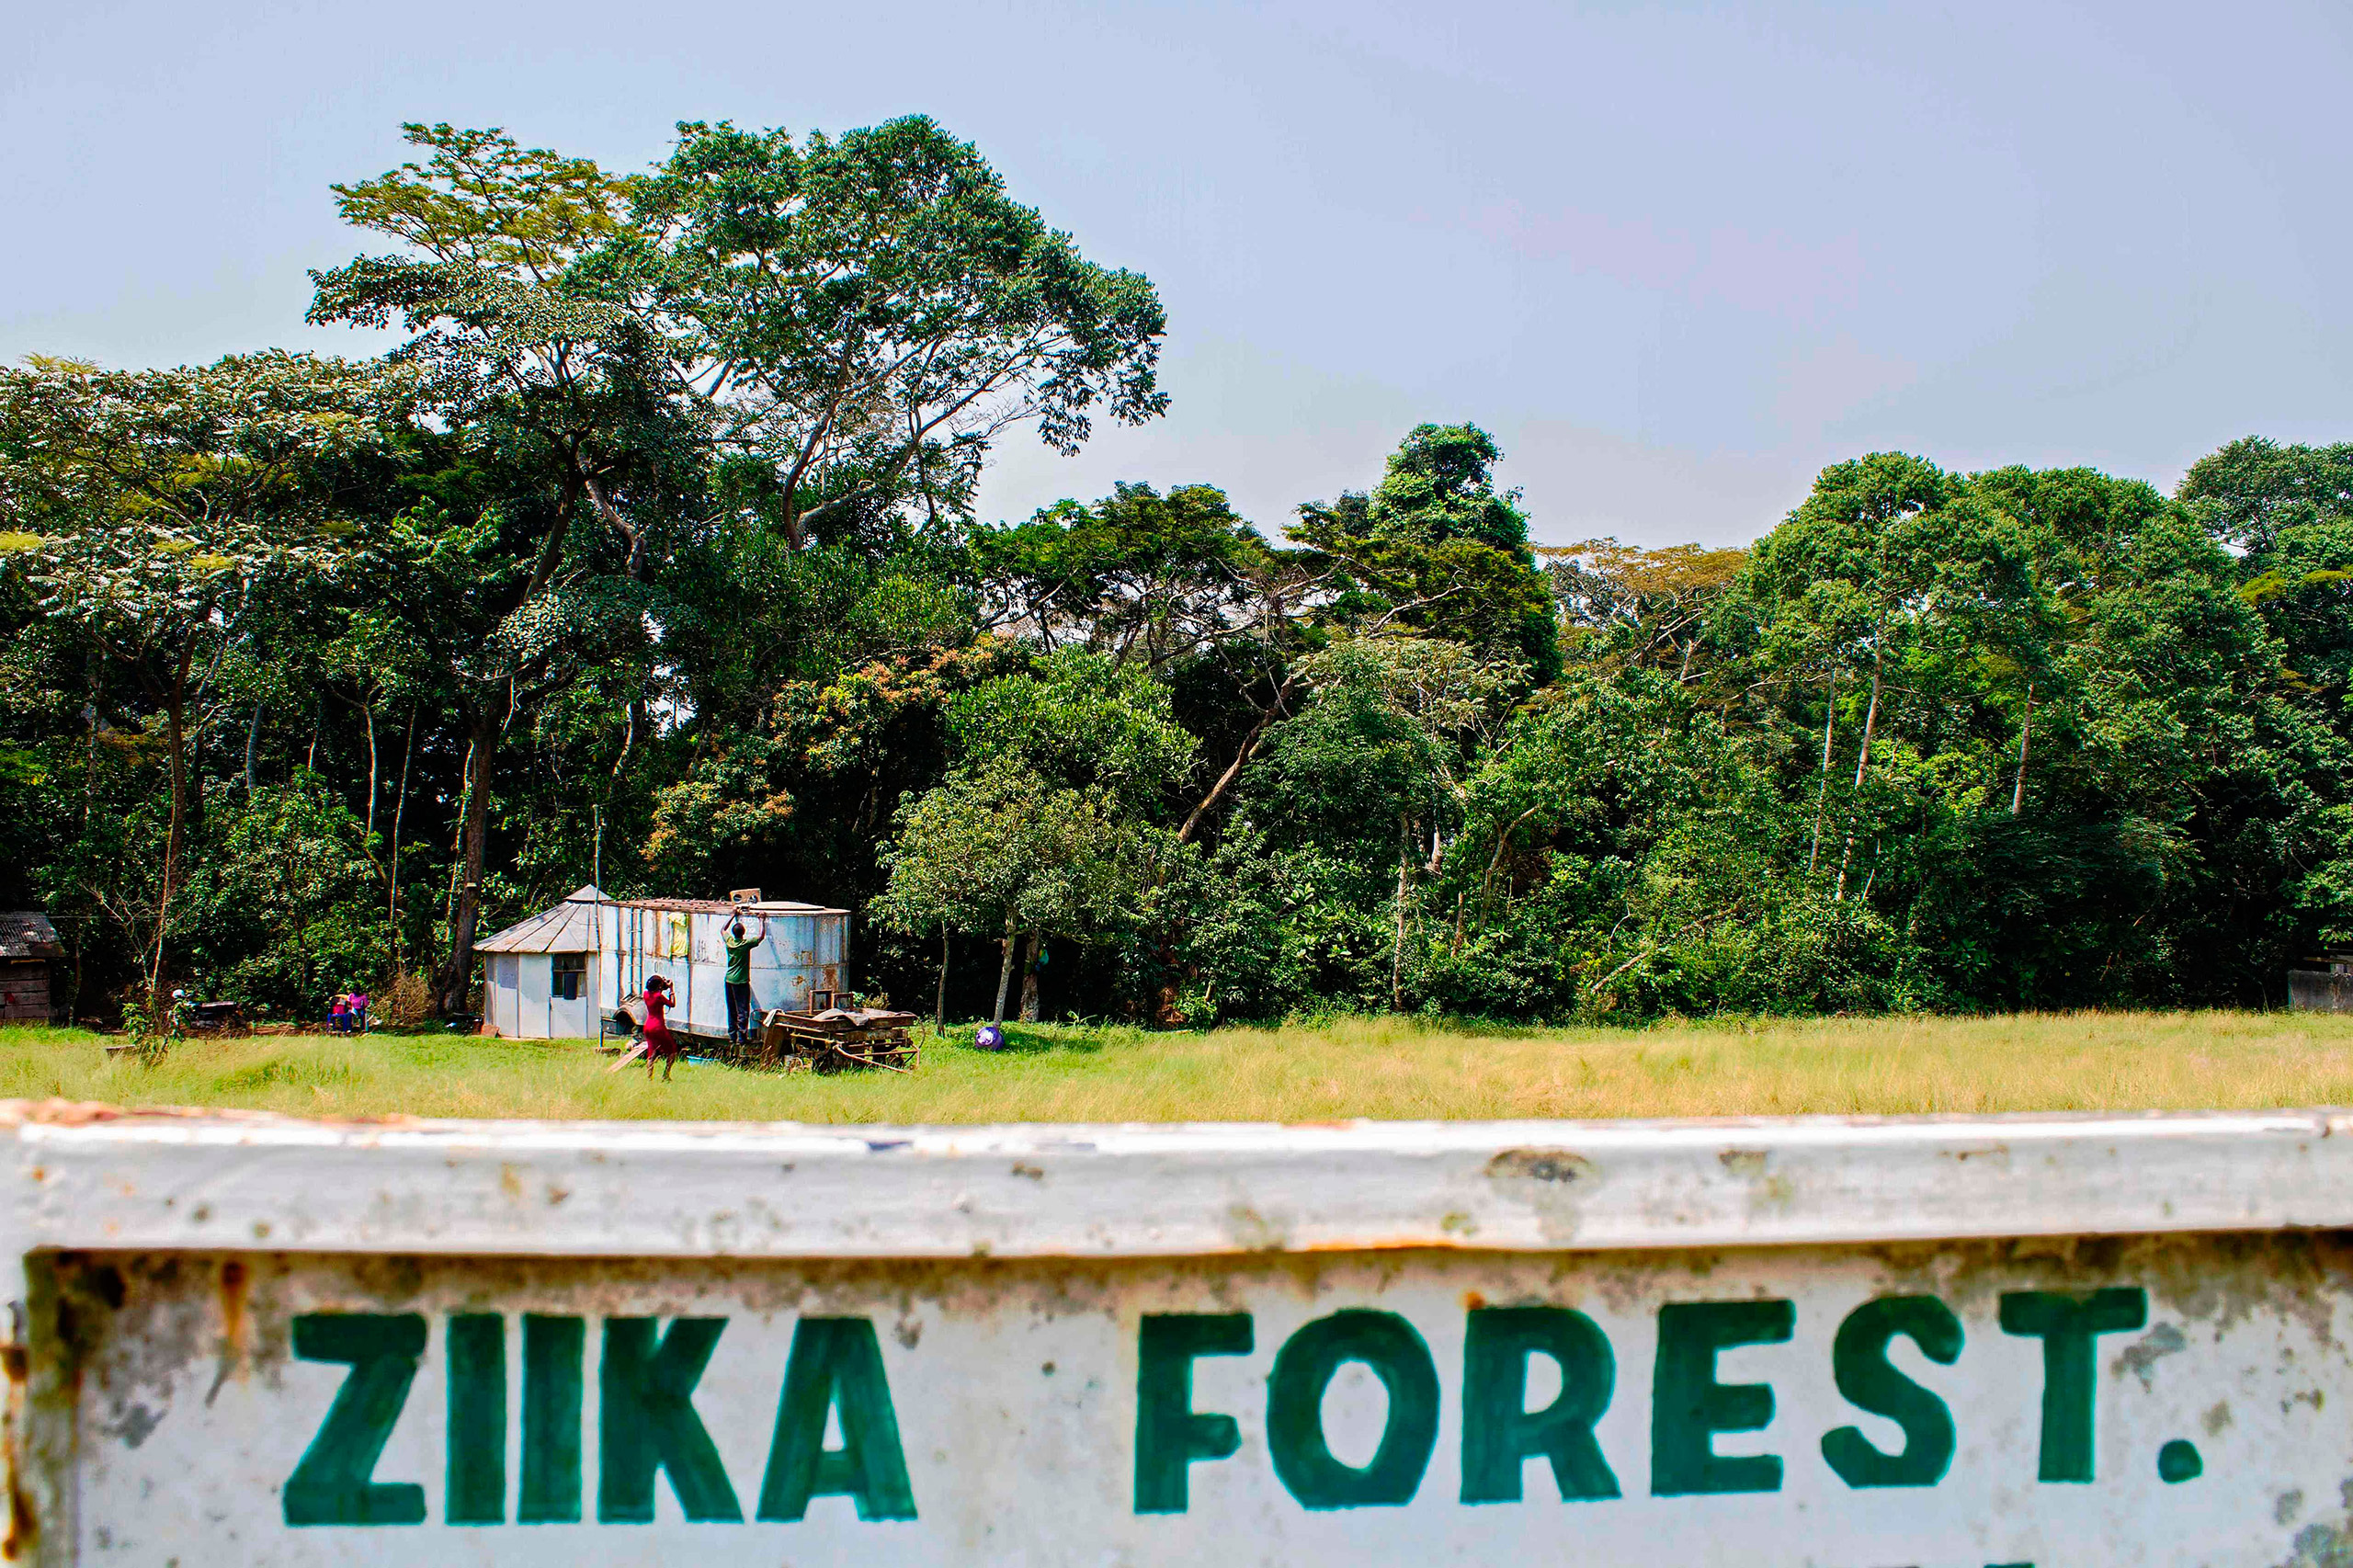 A sign post leading to the Ziika forest is seen near Entebbe, Uganda, Jan. 29, 2016. The Zika virus was first discovered here by scientists in April 1947 after testing a macaque monkey. (Isaac Kasamani—AFP/Getty Images)